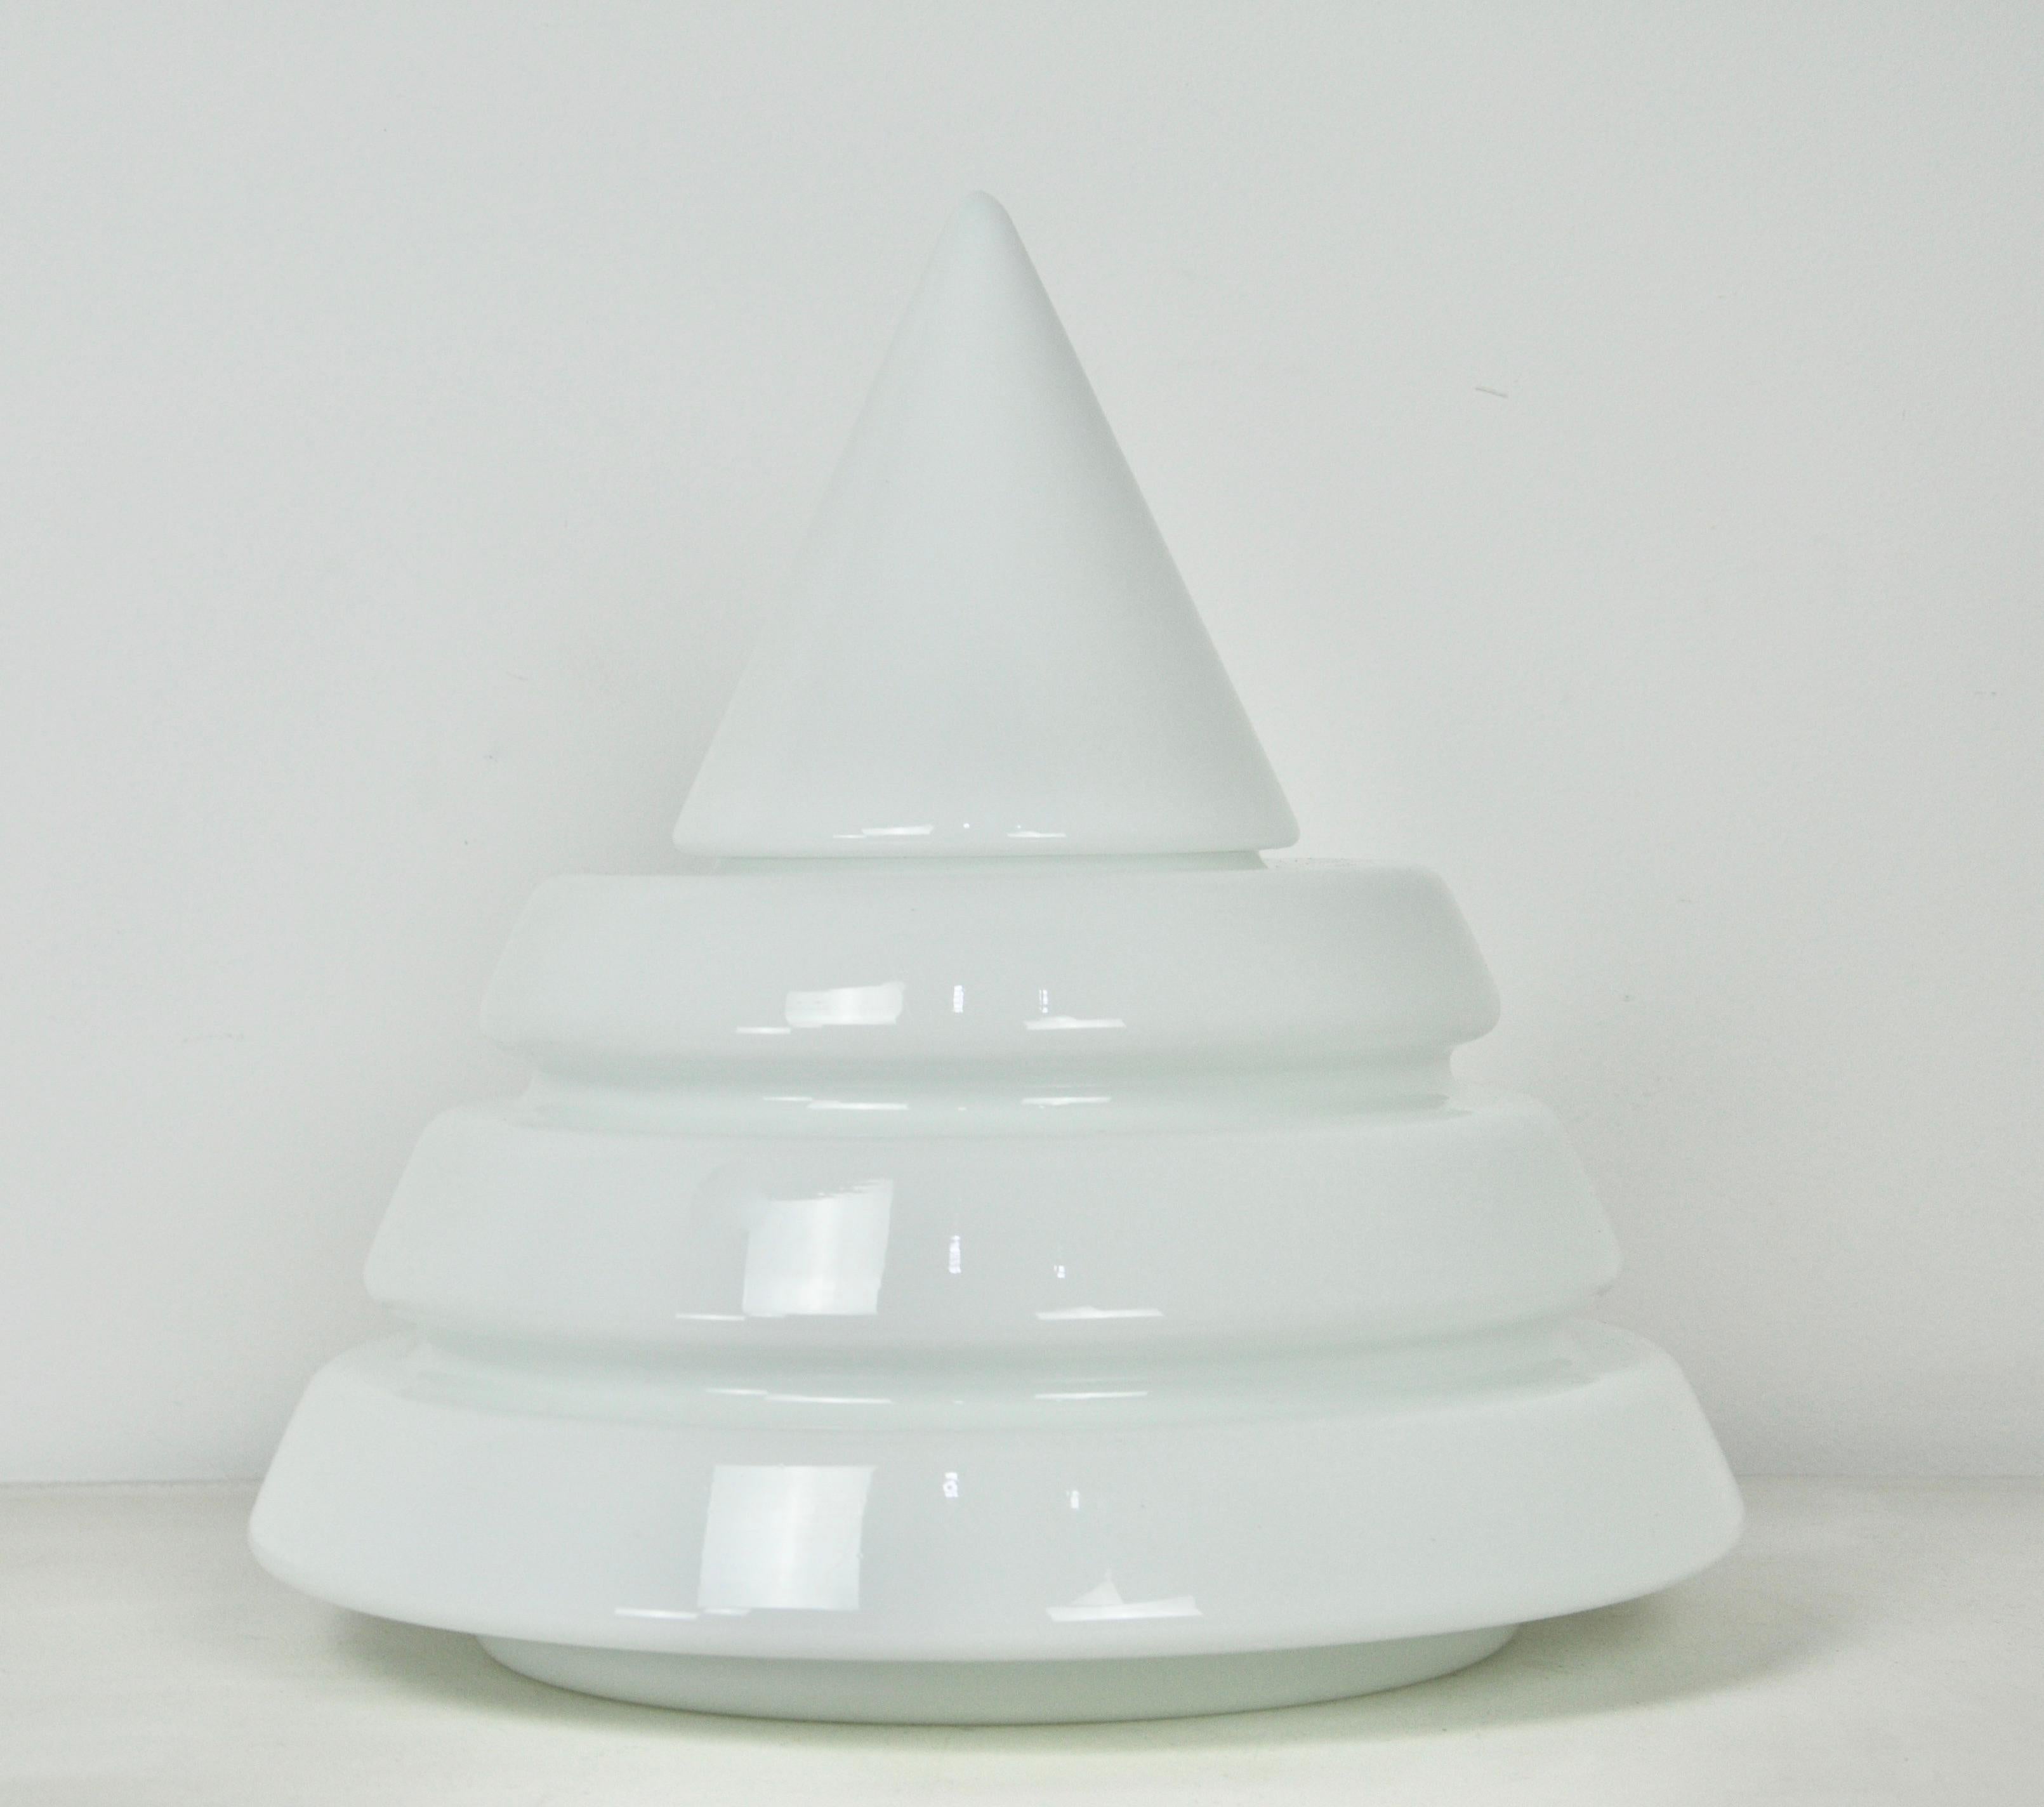 White opal glass lamp. Wear and tear due to time and age of the lamp.